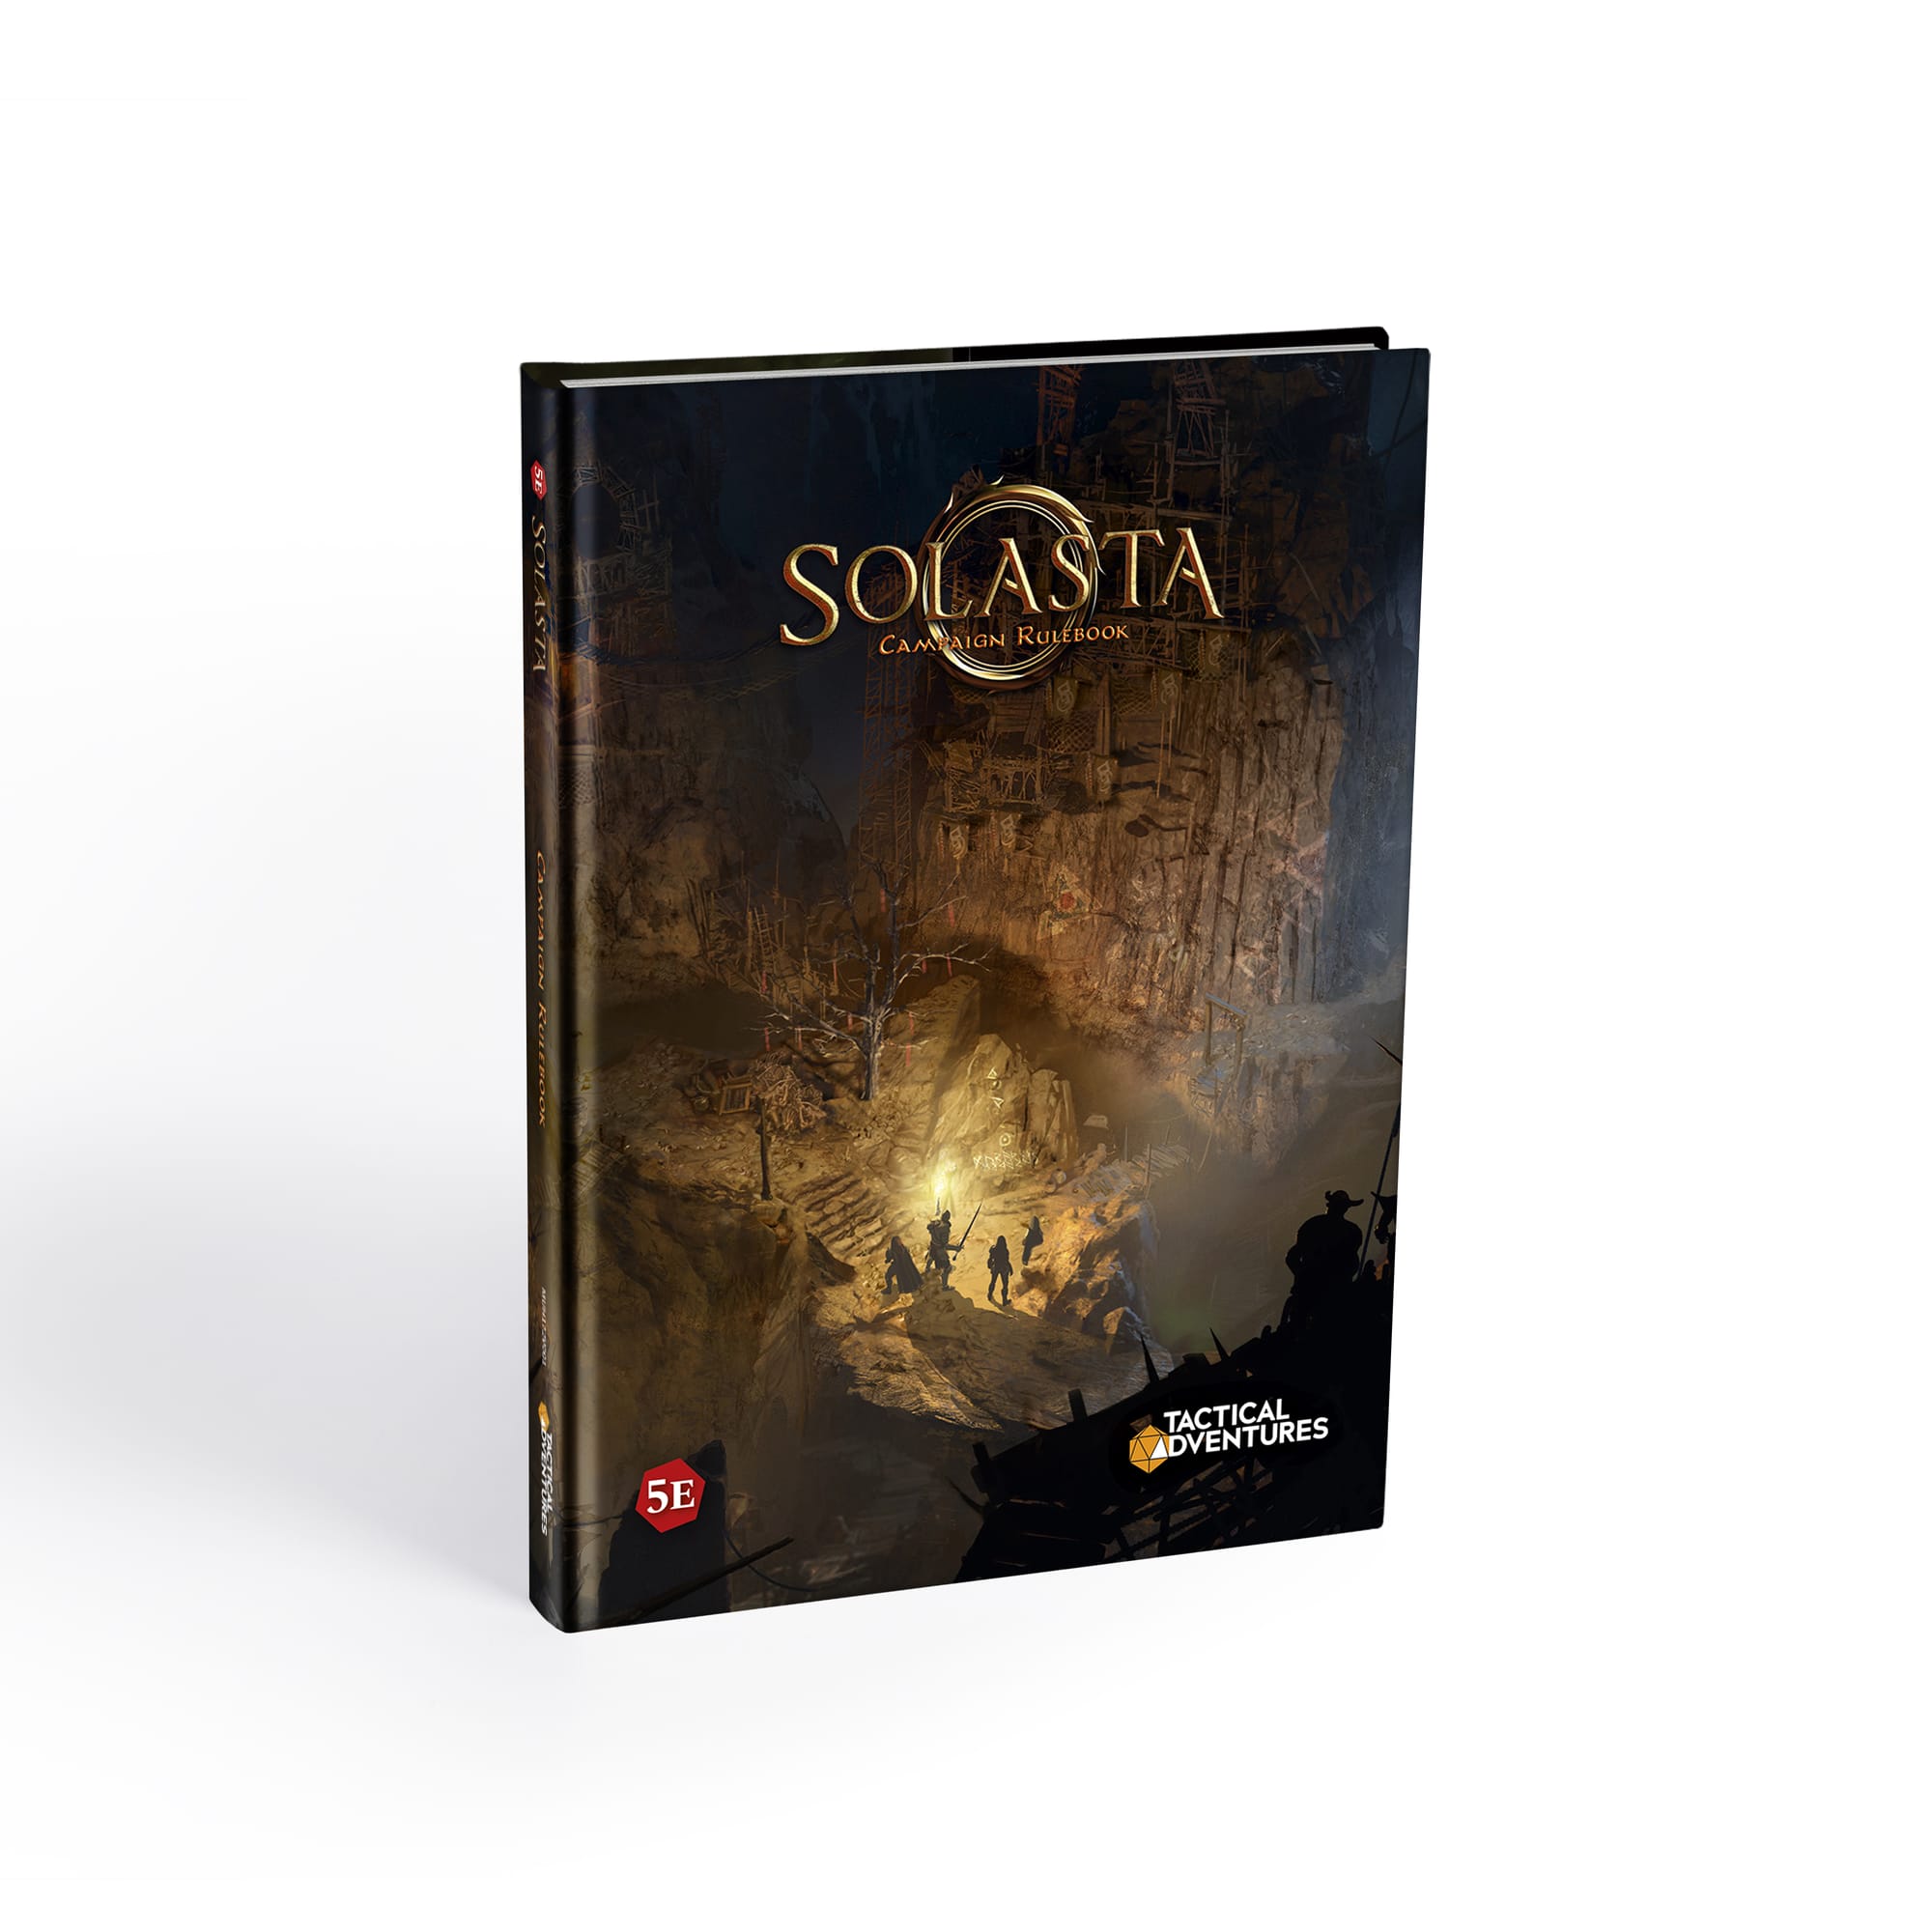 Tactical Adventures and Modiphius Entertainment to Launch Revised Solasta Campaign Rulebook